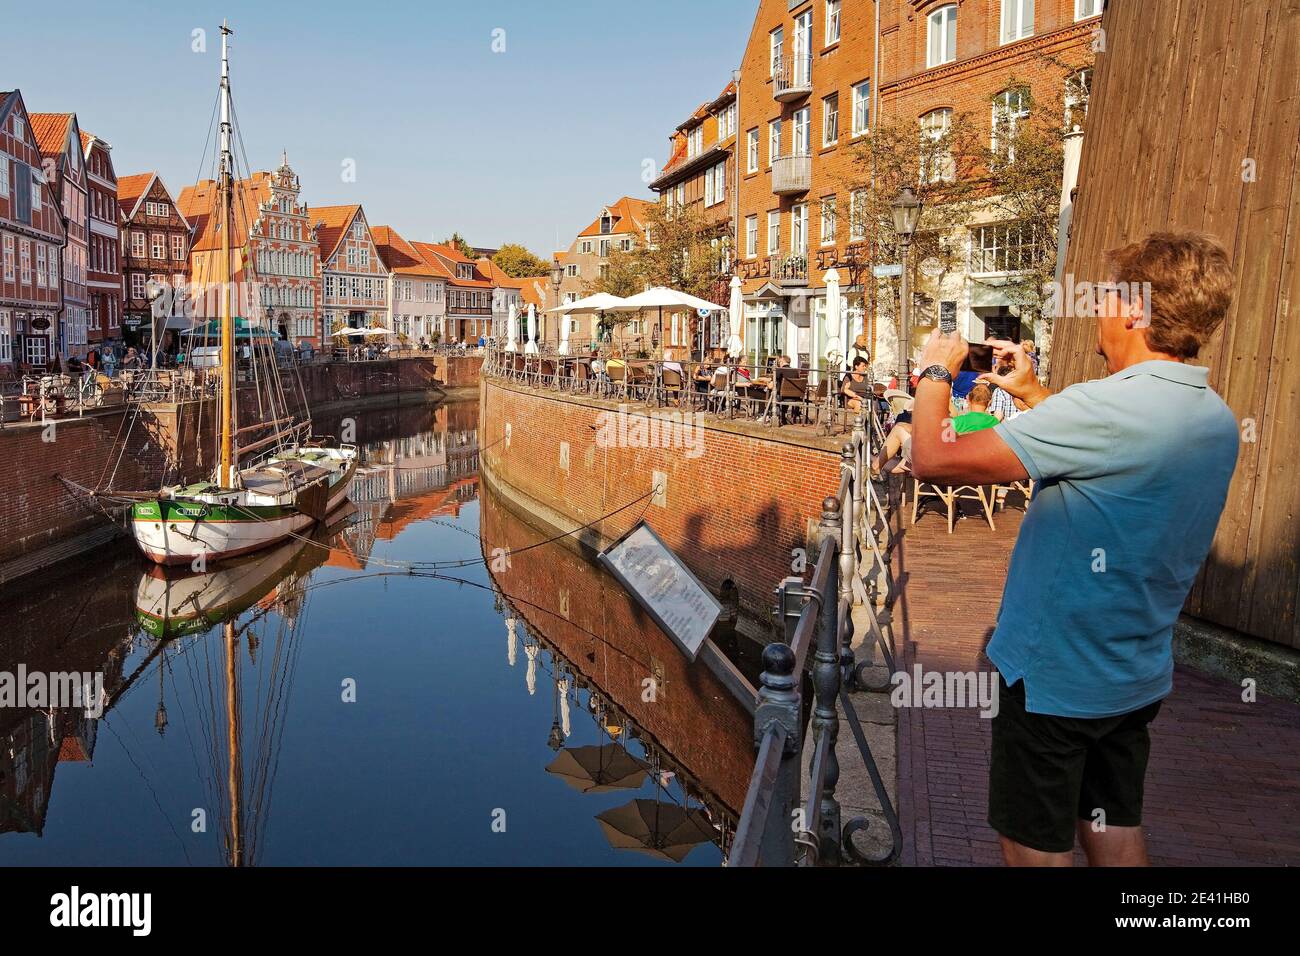 Stade old town, man taking photo of Hanse port with sailing ship Willi, Germany, Lower Saxony, Stade Stock Photo